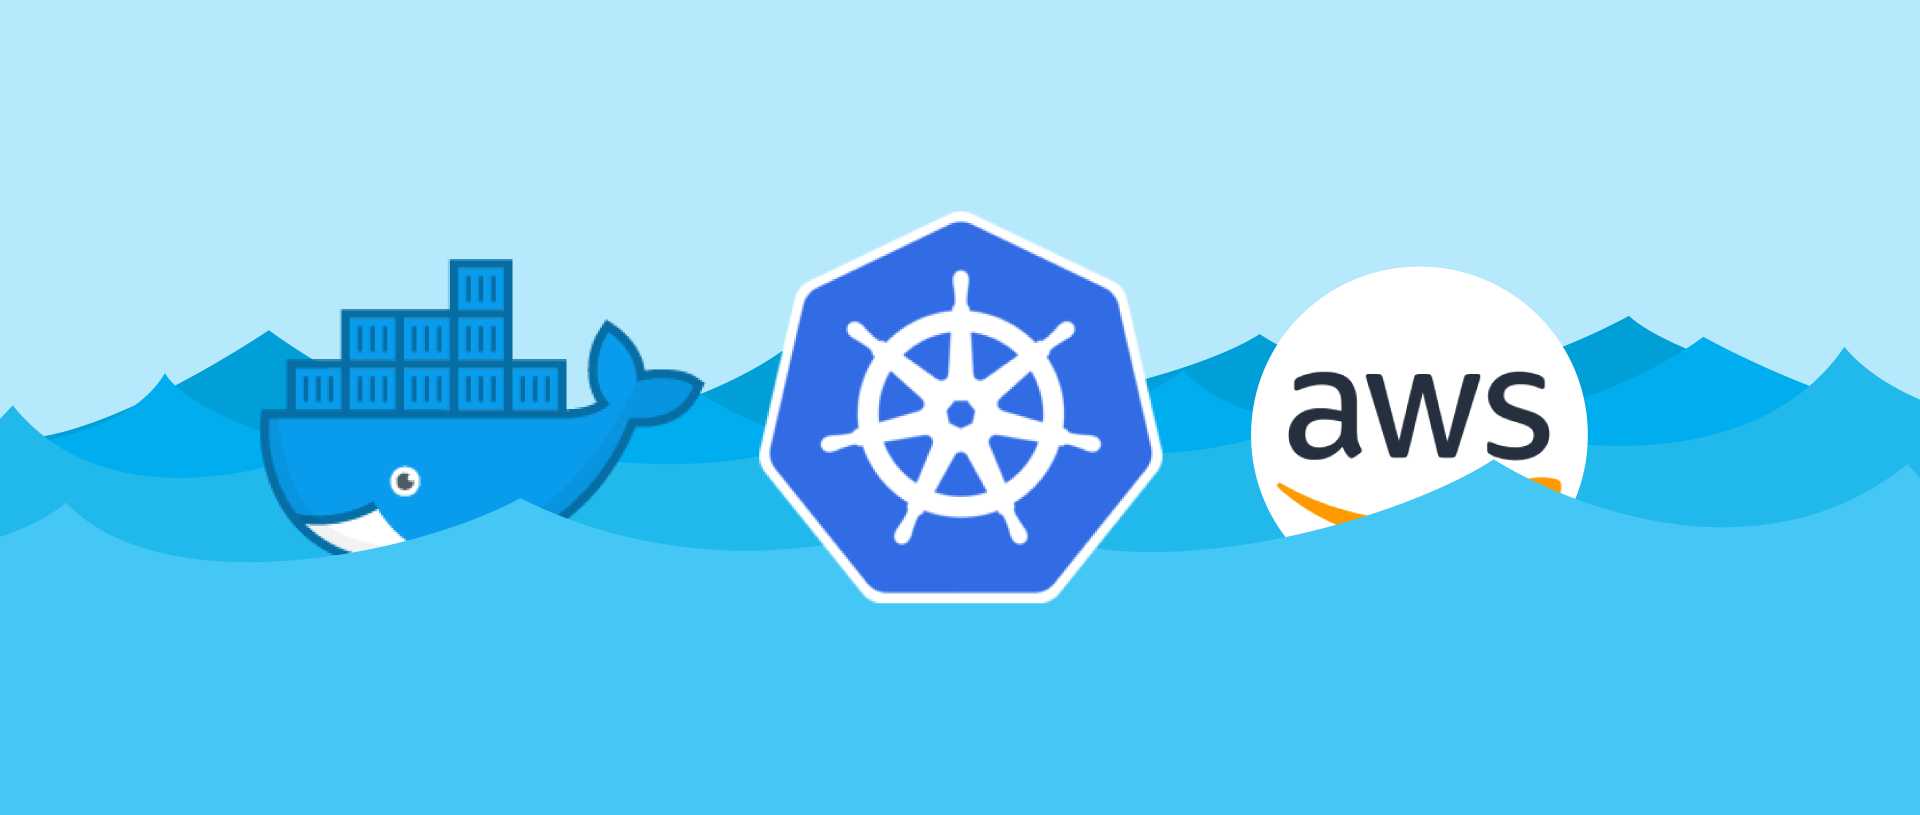 A Practical Guide to Kubernetes